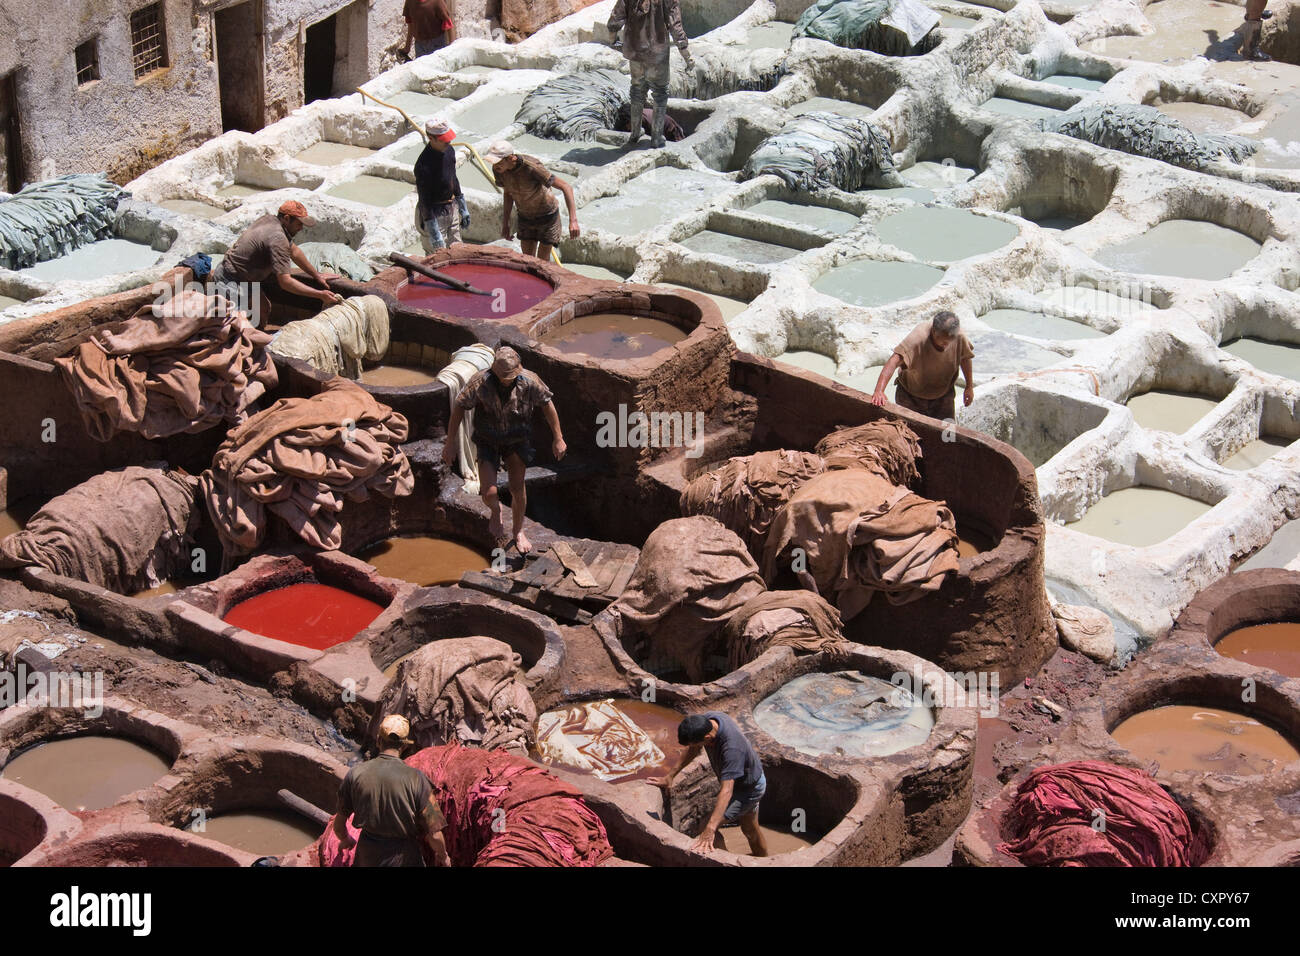 Tannery in the old medina, Fes, Morocco Stock Photo